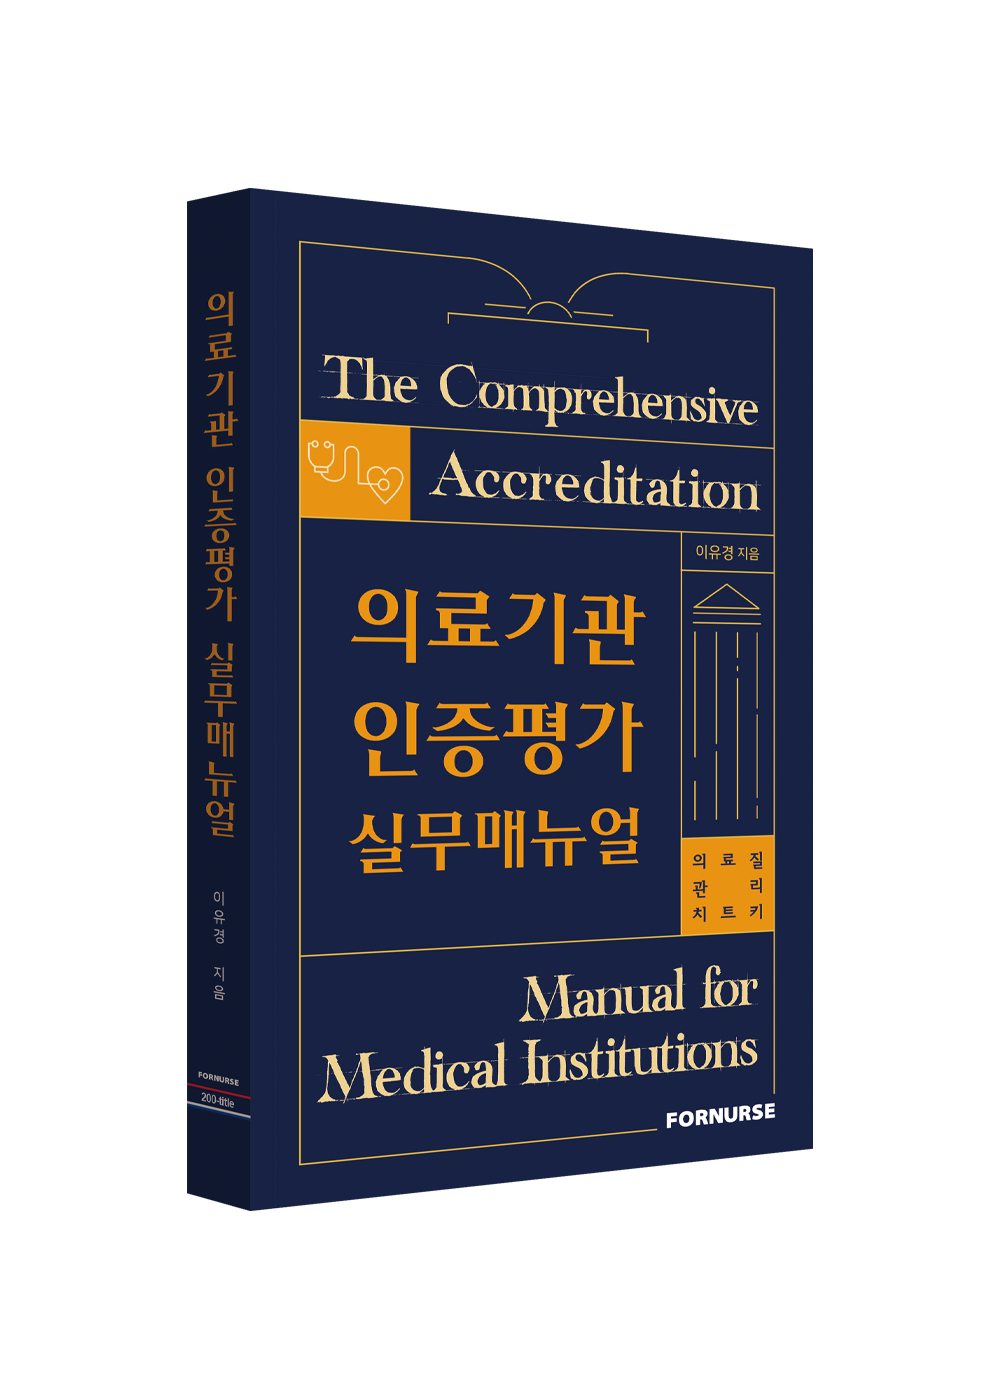 Practice Manual for Accreditation Evaluation of Medical Institutions